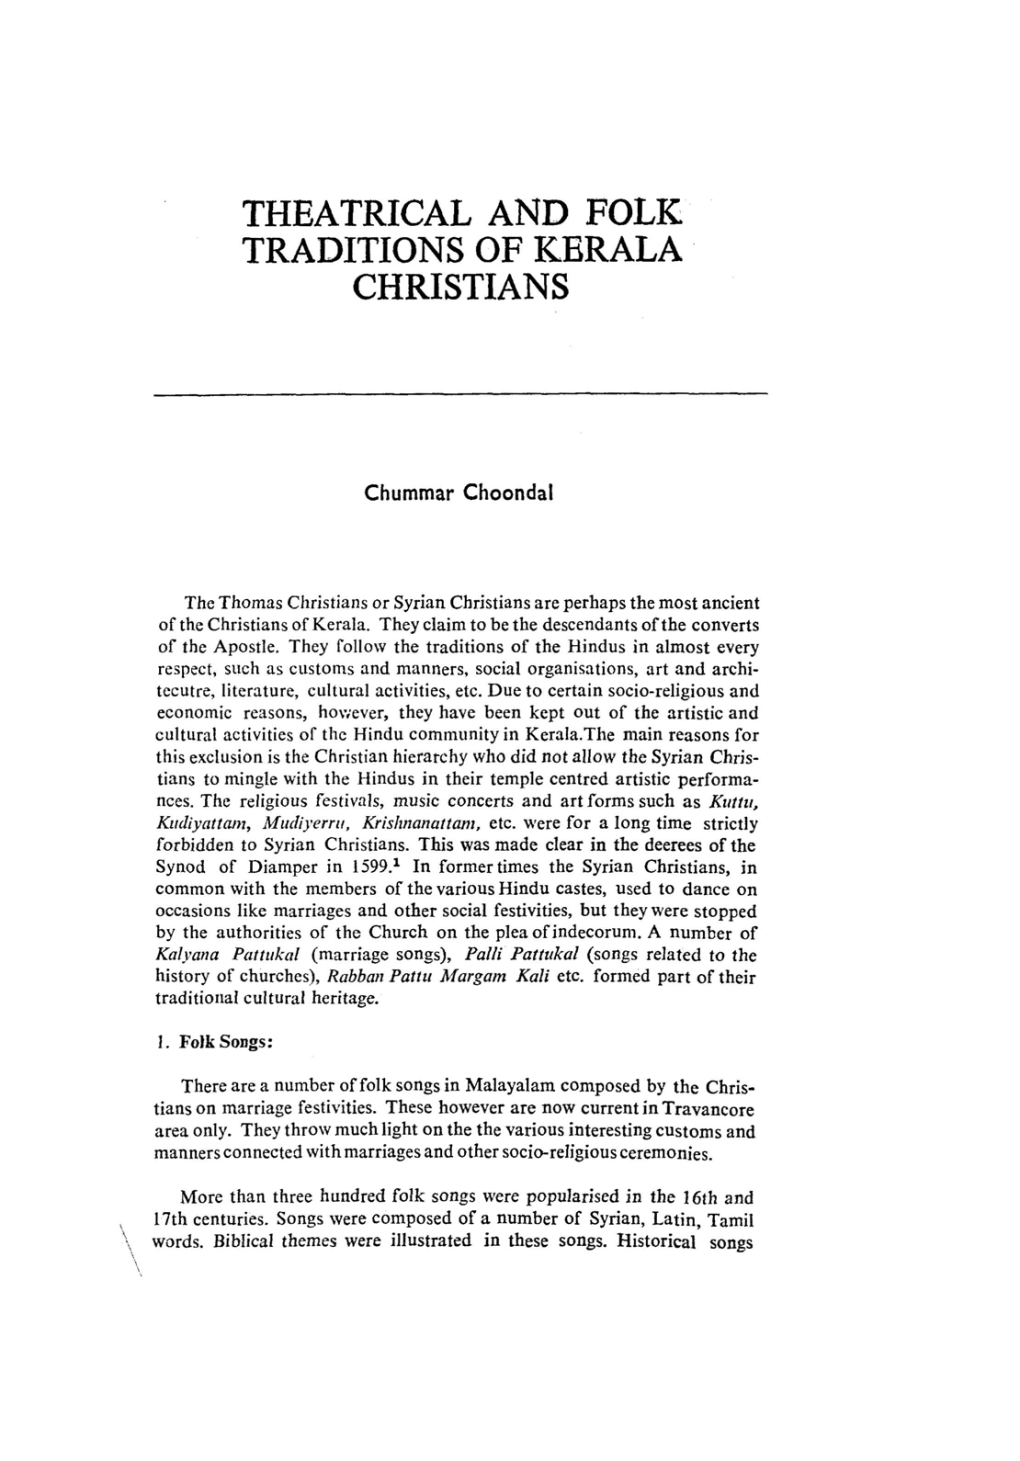 Theatrical and Folk Traditions of Kerala Christians